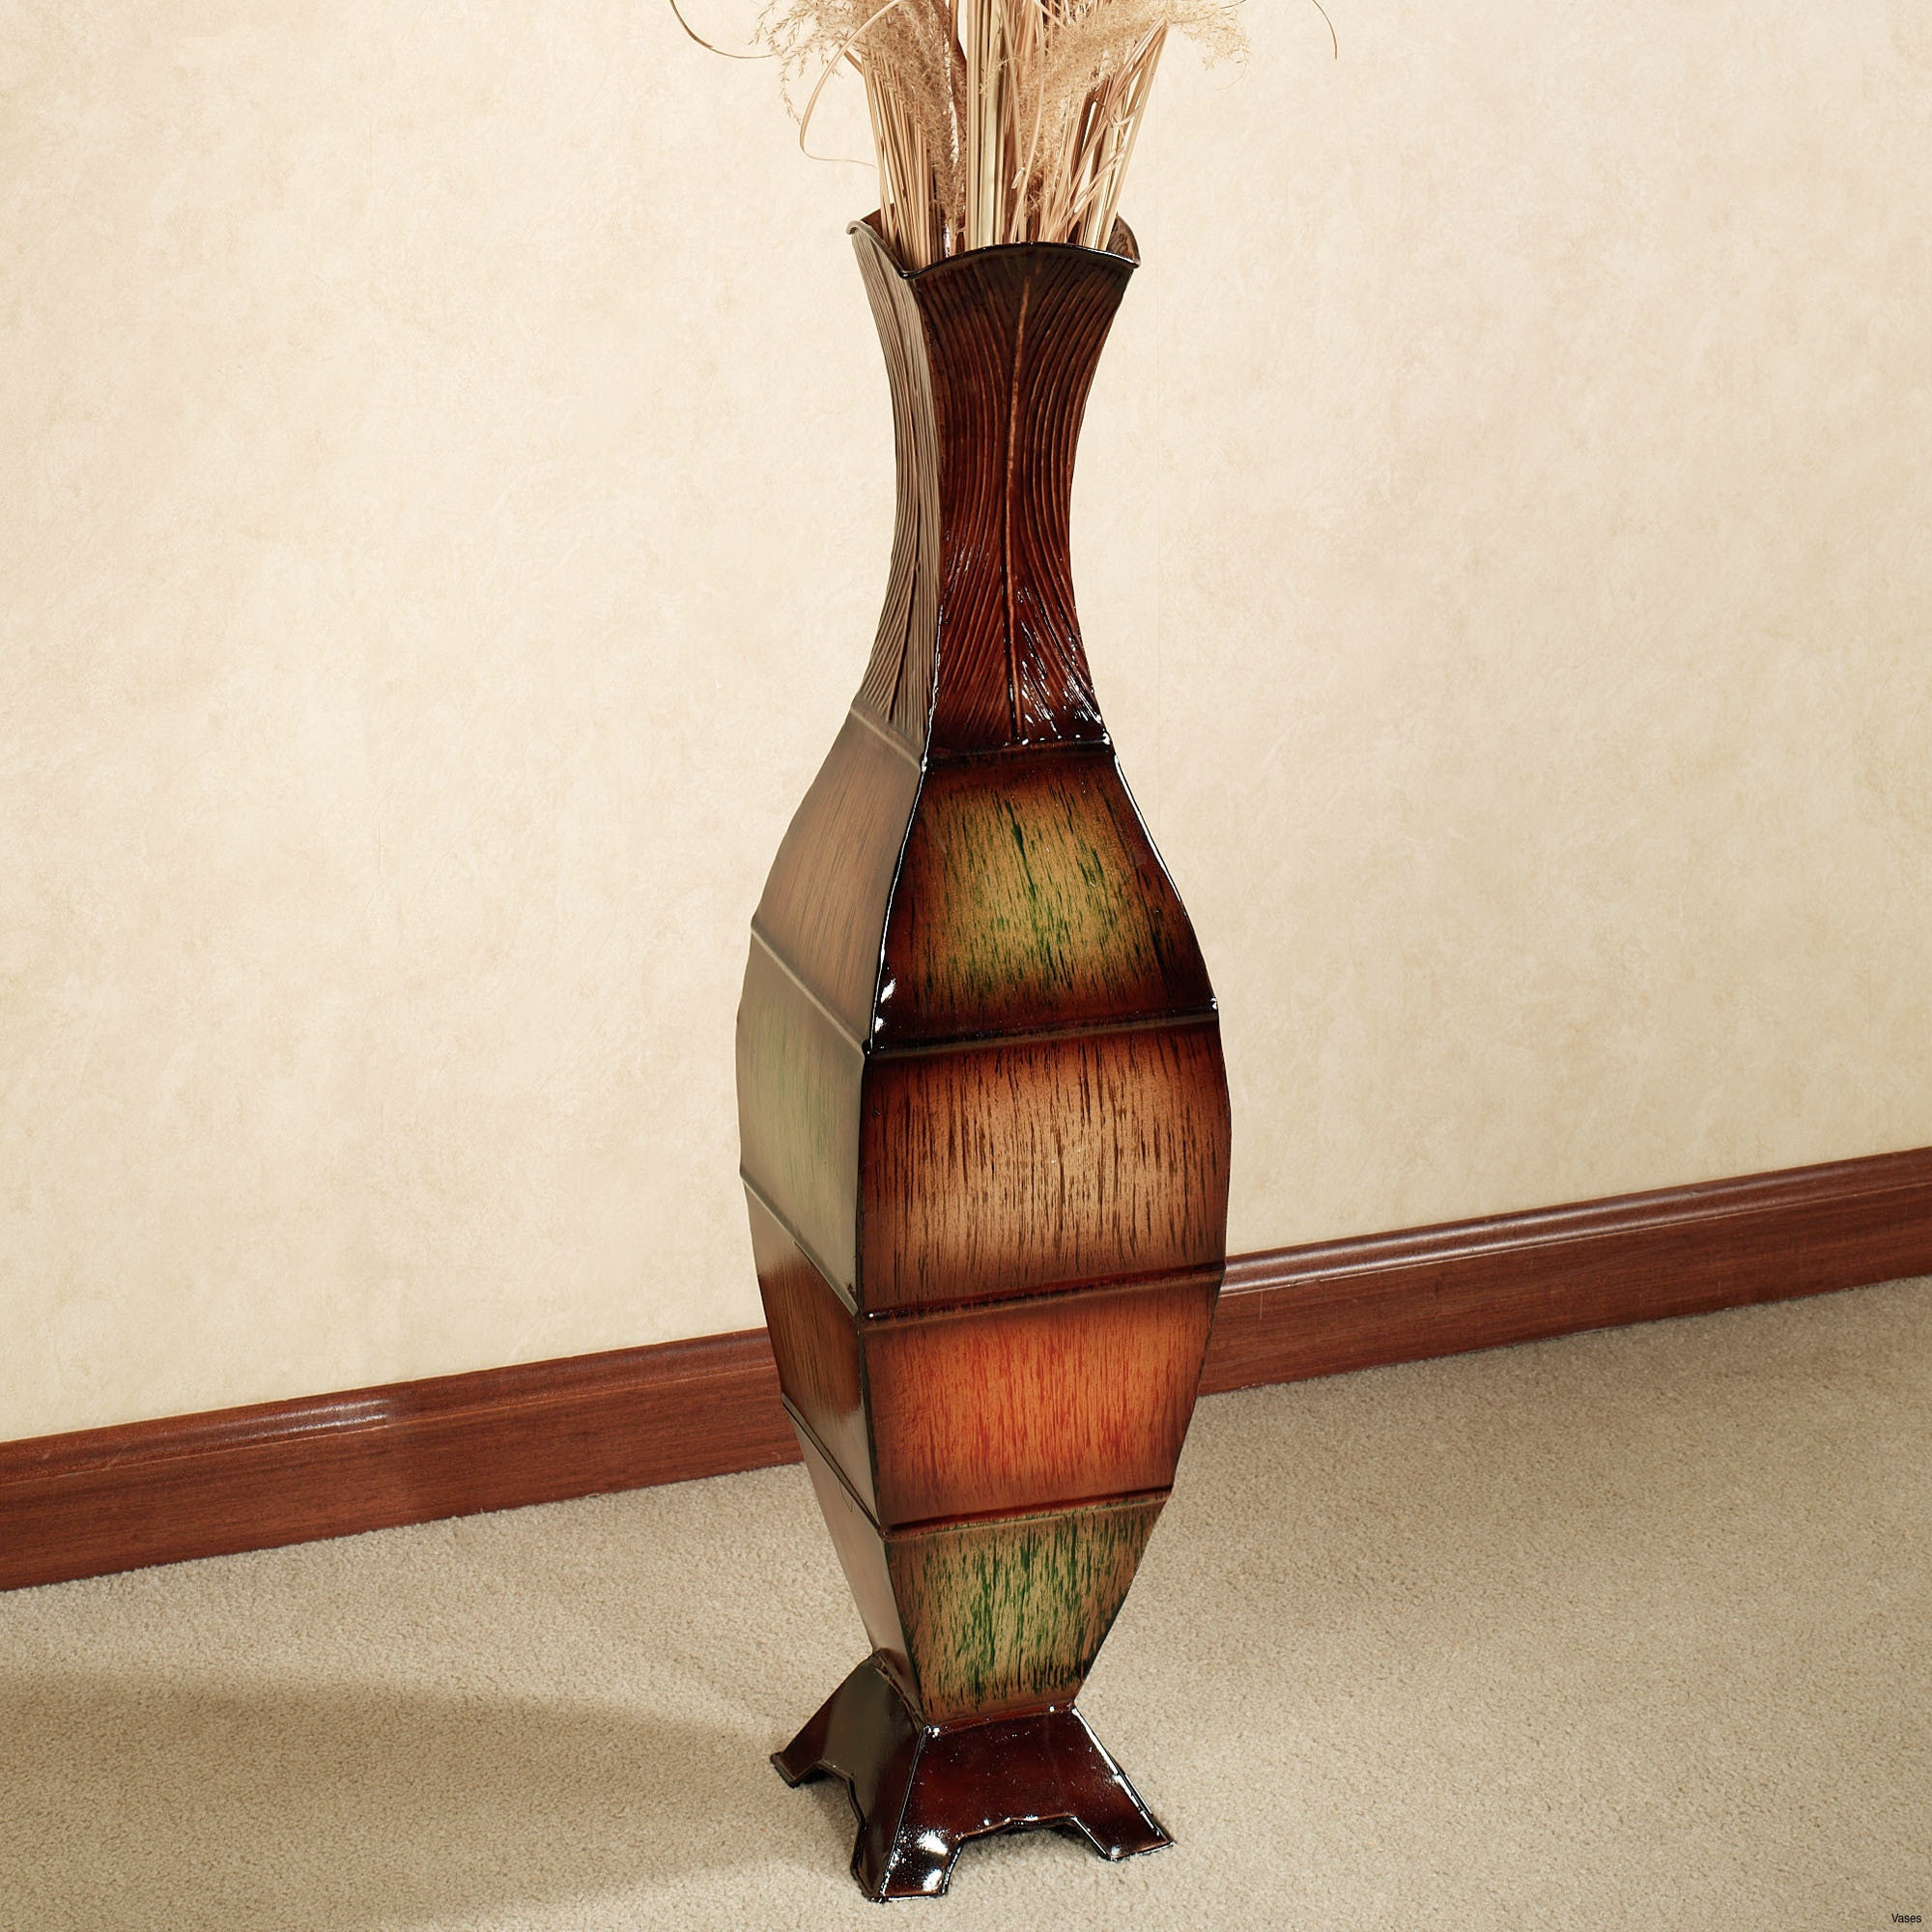 30 Popular Tall Vase for Bamboo 2024 free download tall vase for bamboo of 10 best of bamboo vase bogekompresorturkiye com with lamps floor contemporary new luxury contemporary floor vasesh vases cheap vasesi 5d bamboo lamps floor